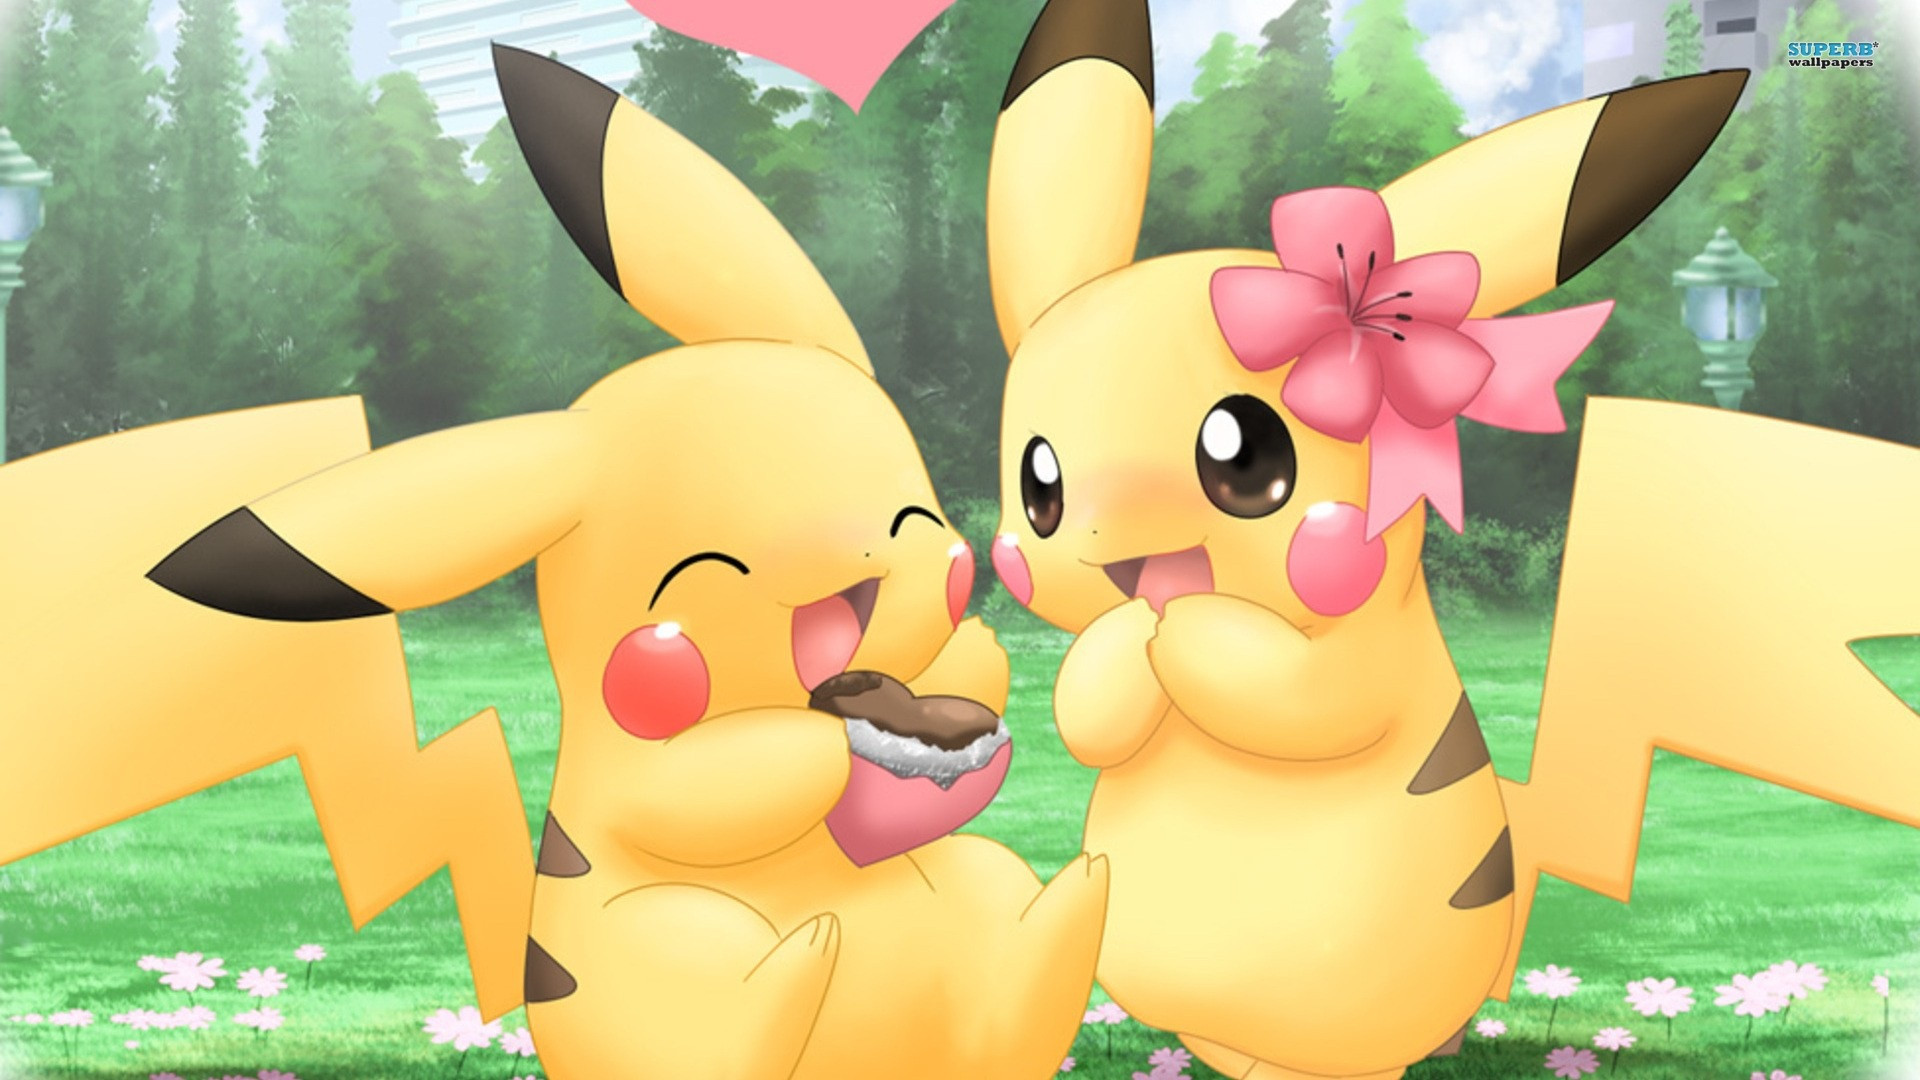 Search Results for “cute pikachu pokemon wallpaper” – Adorable Wallpapers